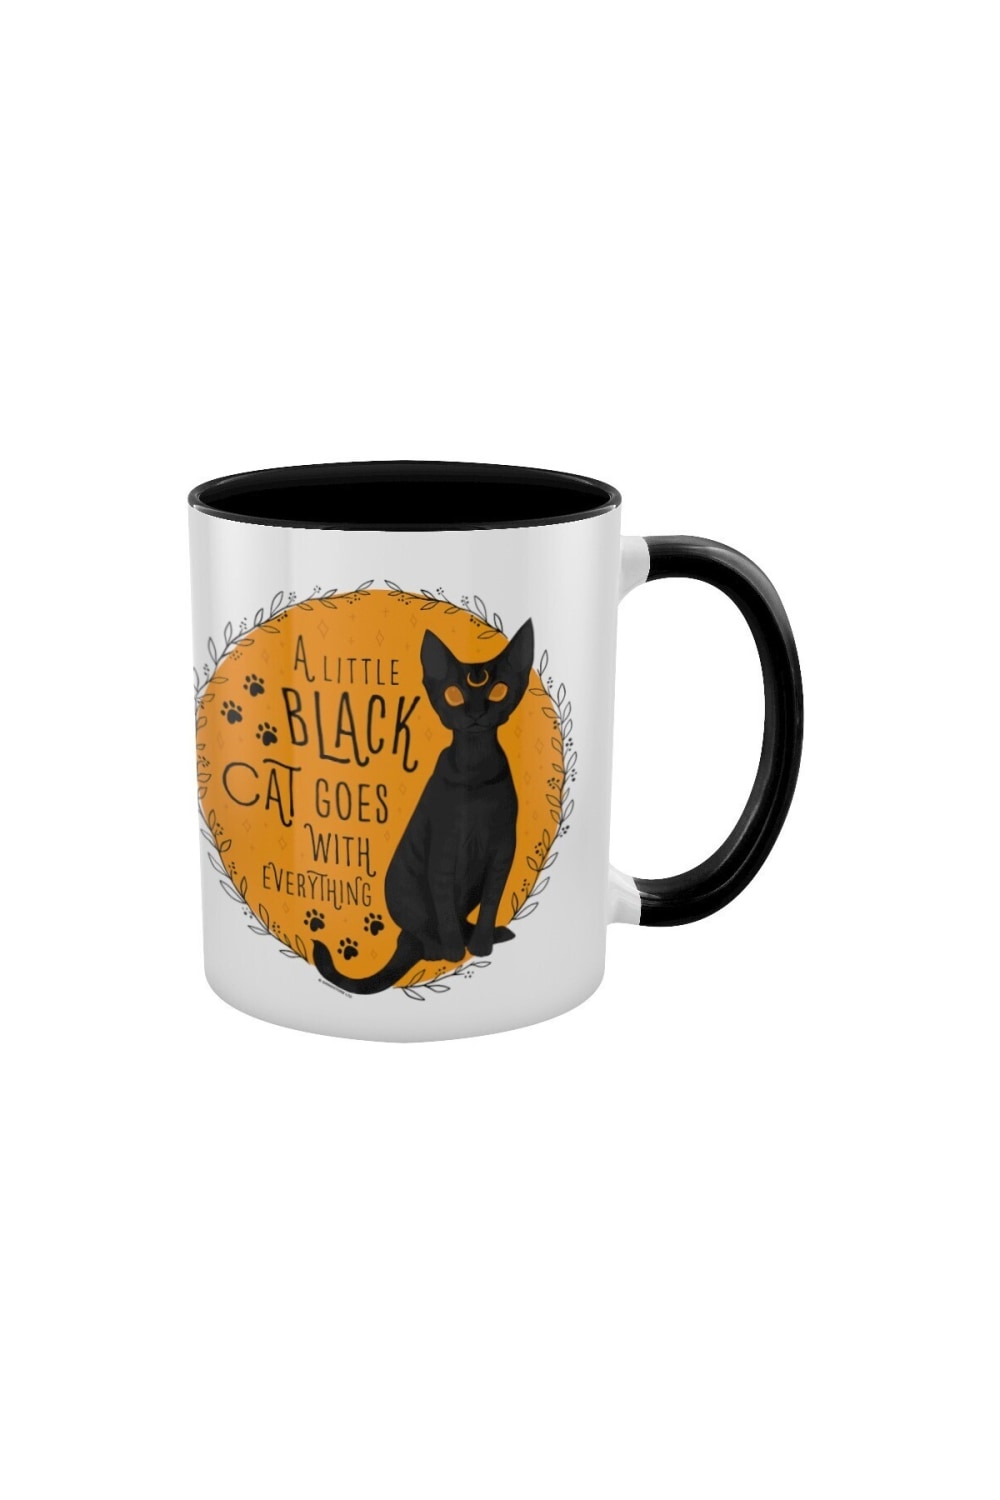 Grindstore A Little Black Cat Goes With Everything Inner Two Tone Mug (White/Black/Yellow) (One Size)